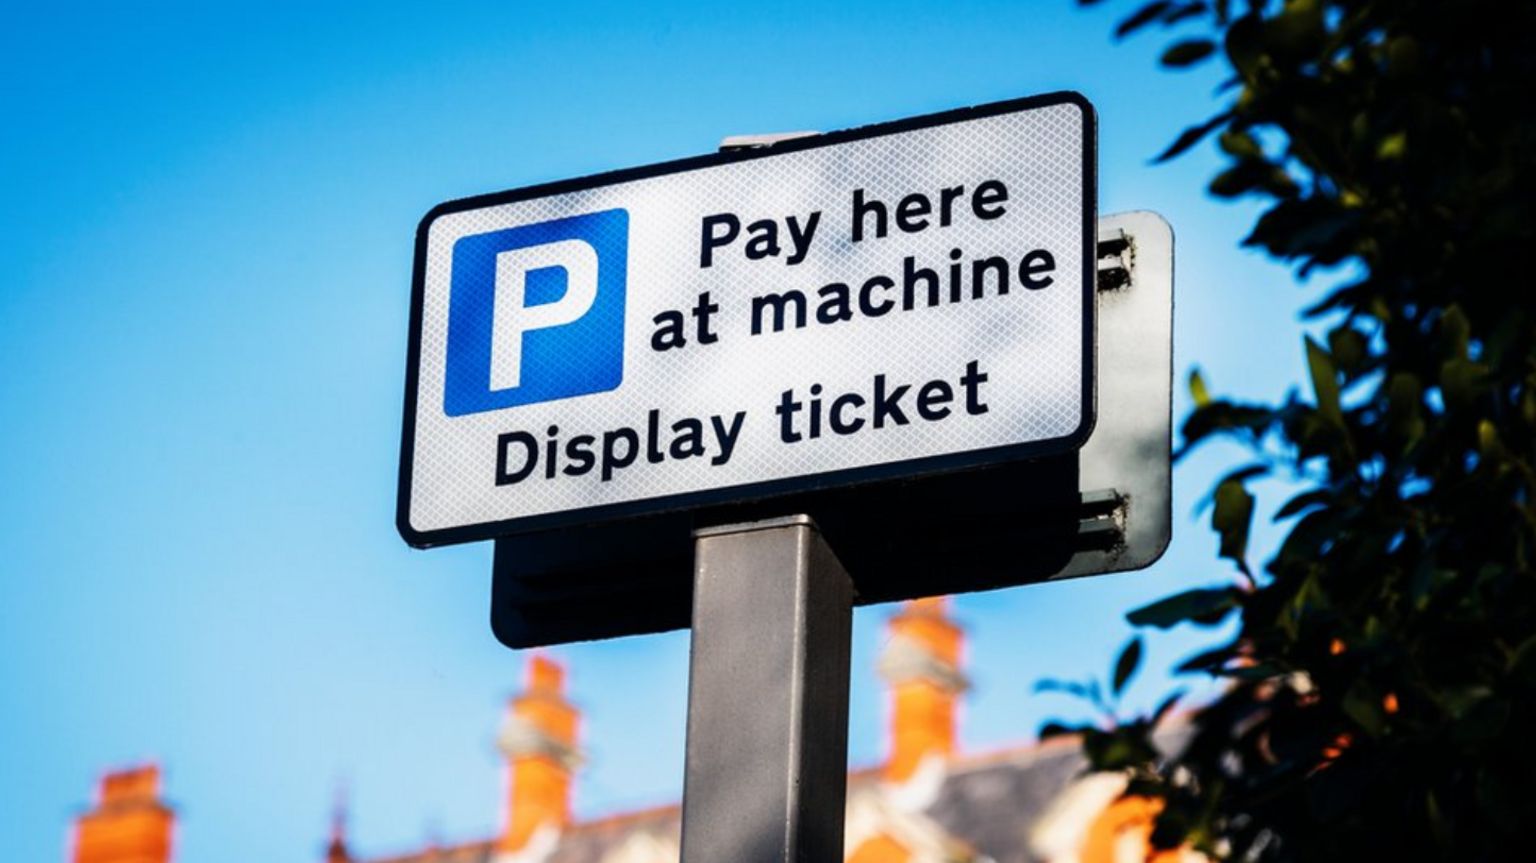 Pay and display